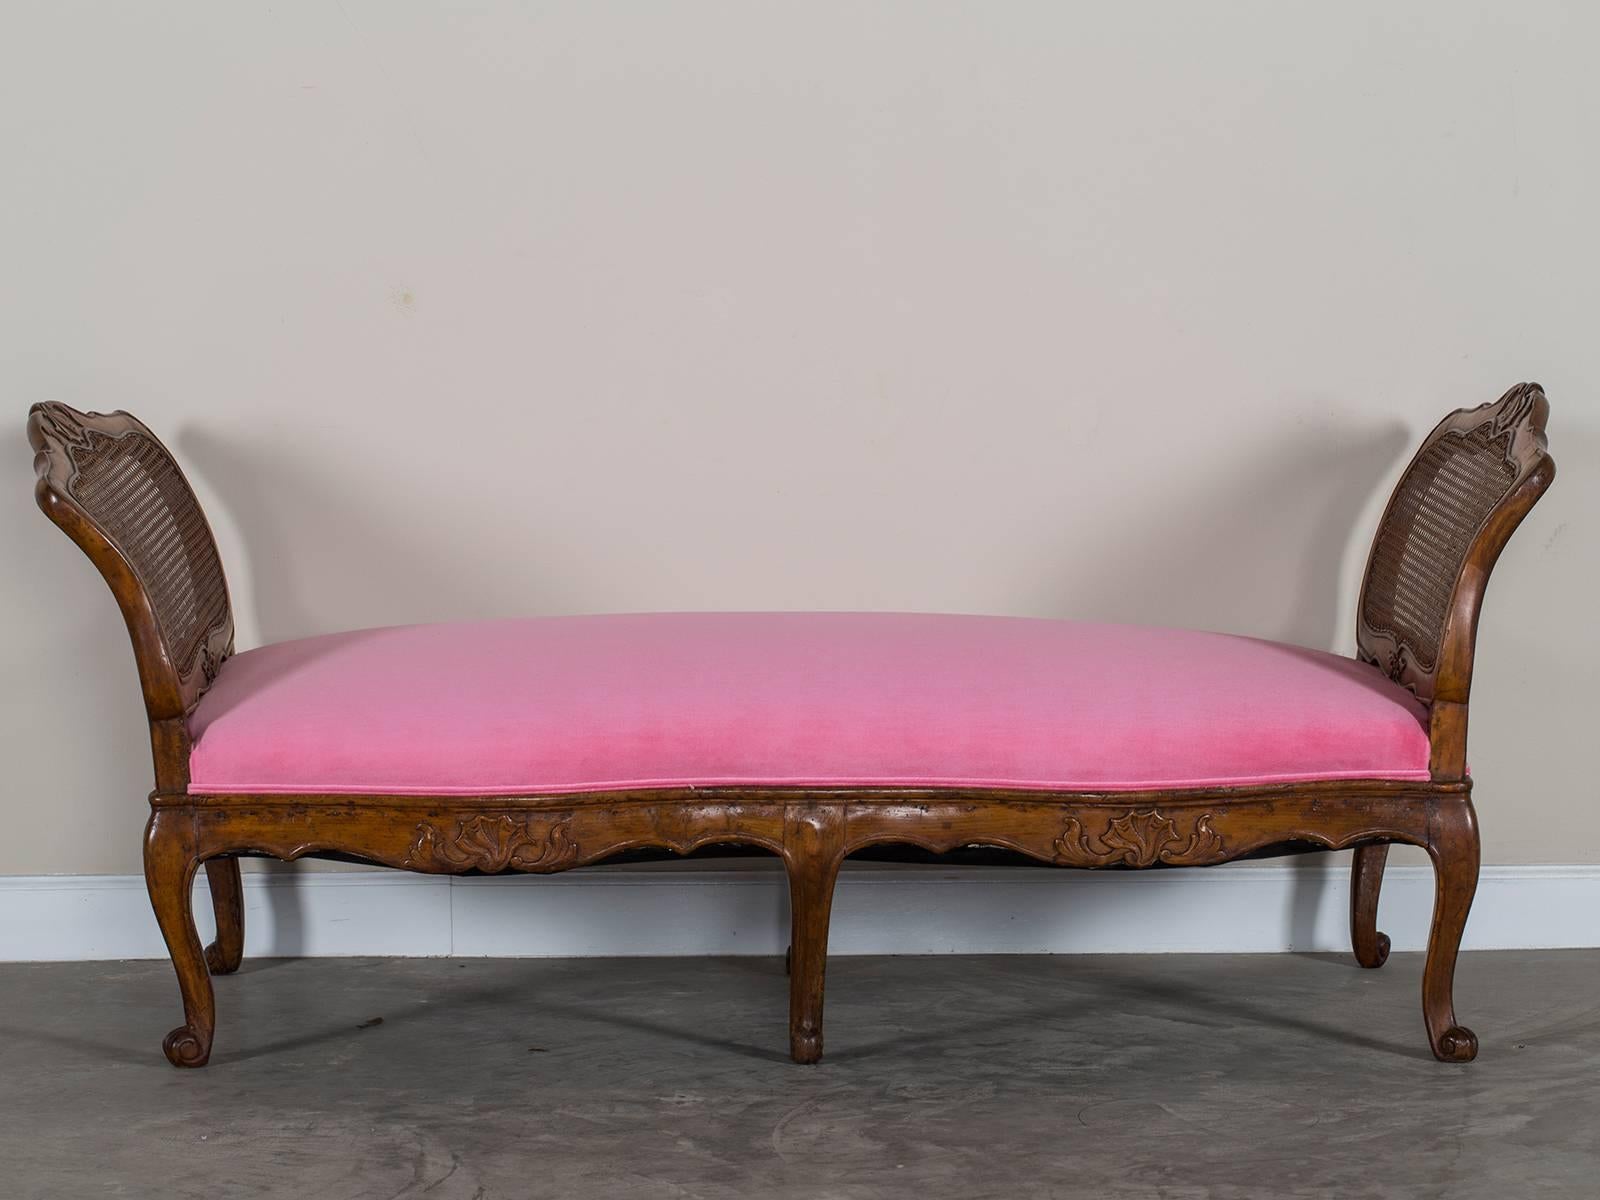 Antique French Louis XV Period Walnut Daybed Chaise Longue circa 1760 6